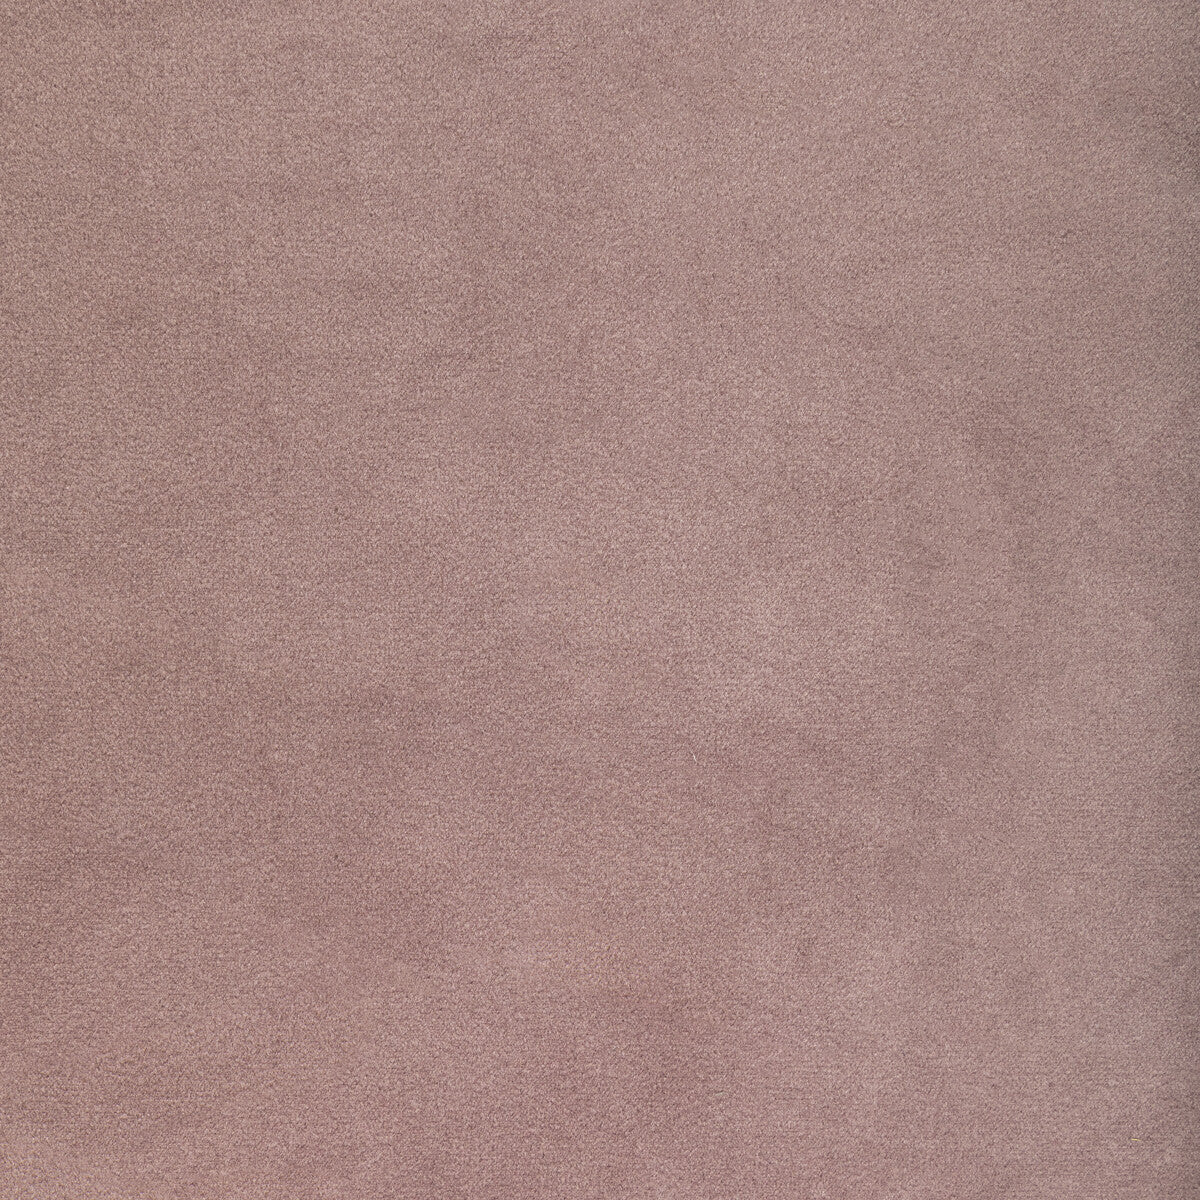 Rocco Velvet fabric in wisteria color - pattern KW-10065.110.0 - by Kravet Contract